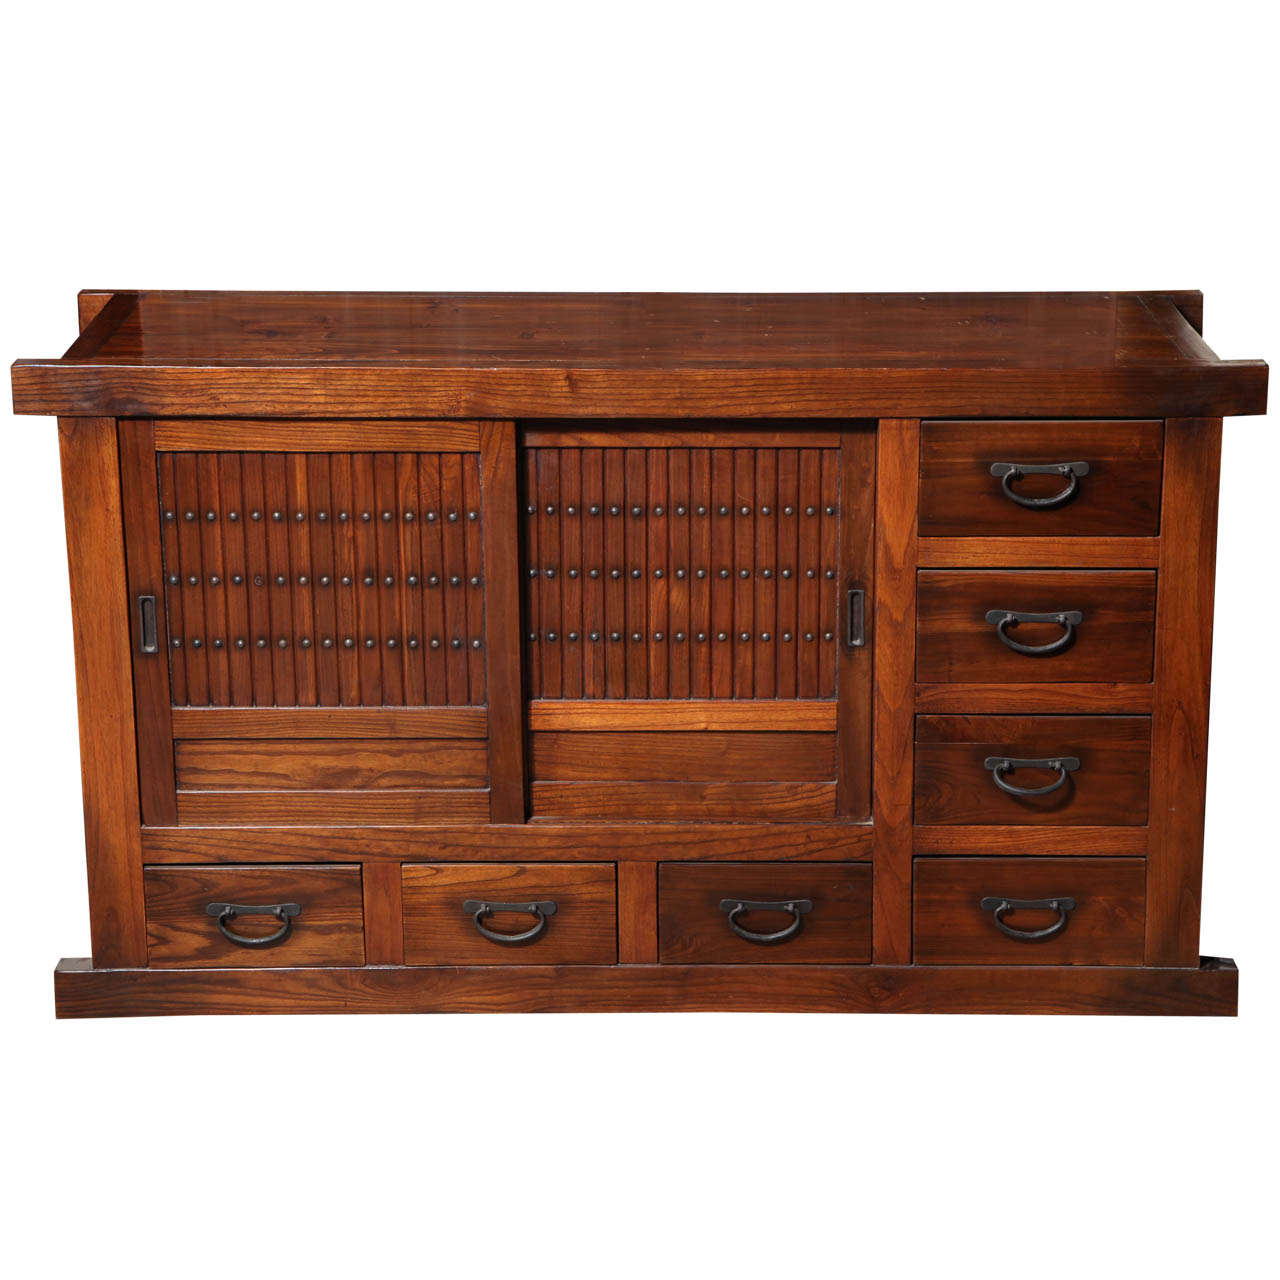 Japanese Meiji Period Brown Lacquered Tansu Sideboard with Doors and Drawers